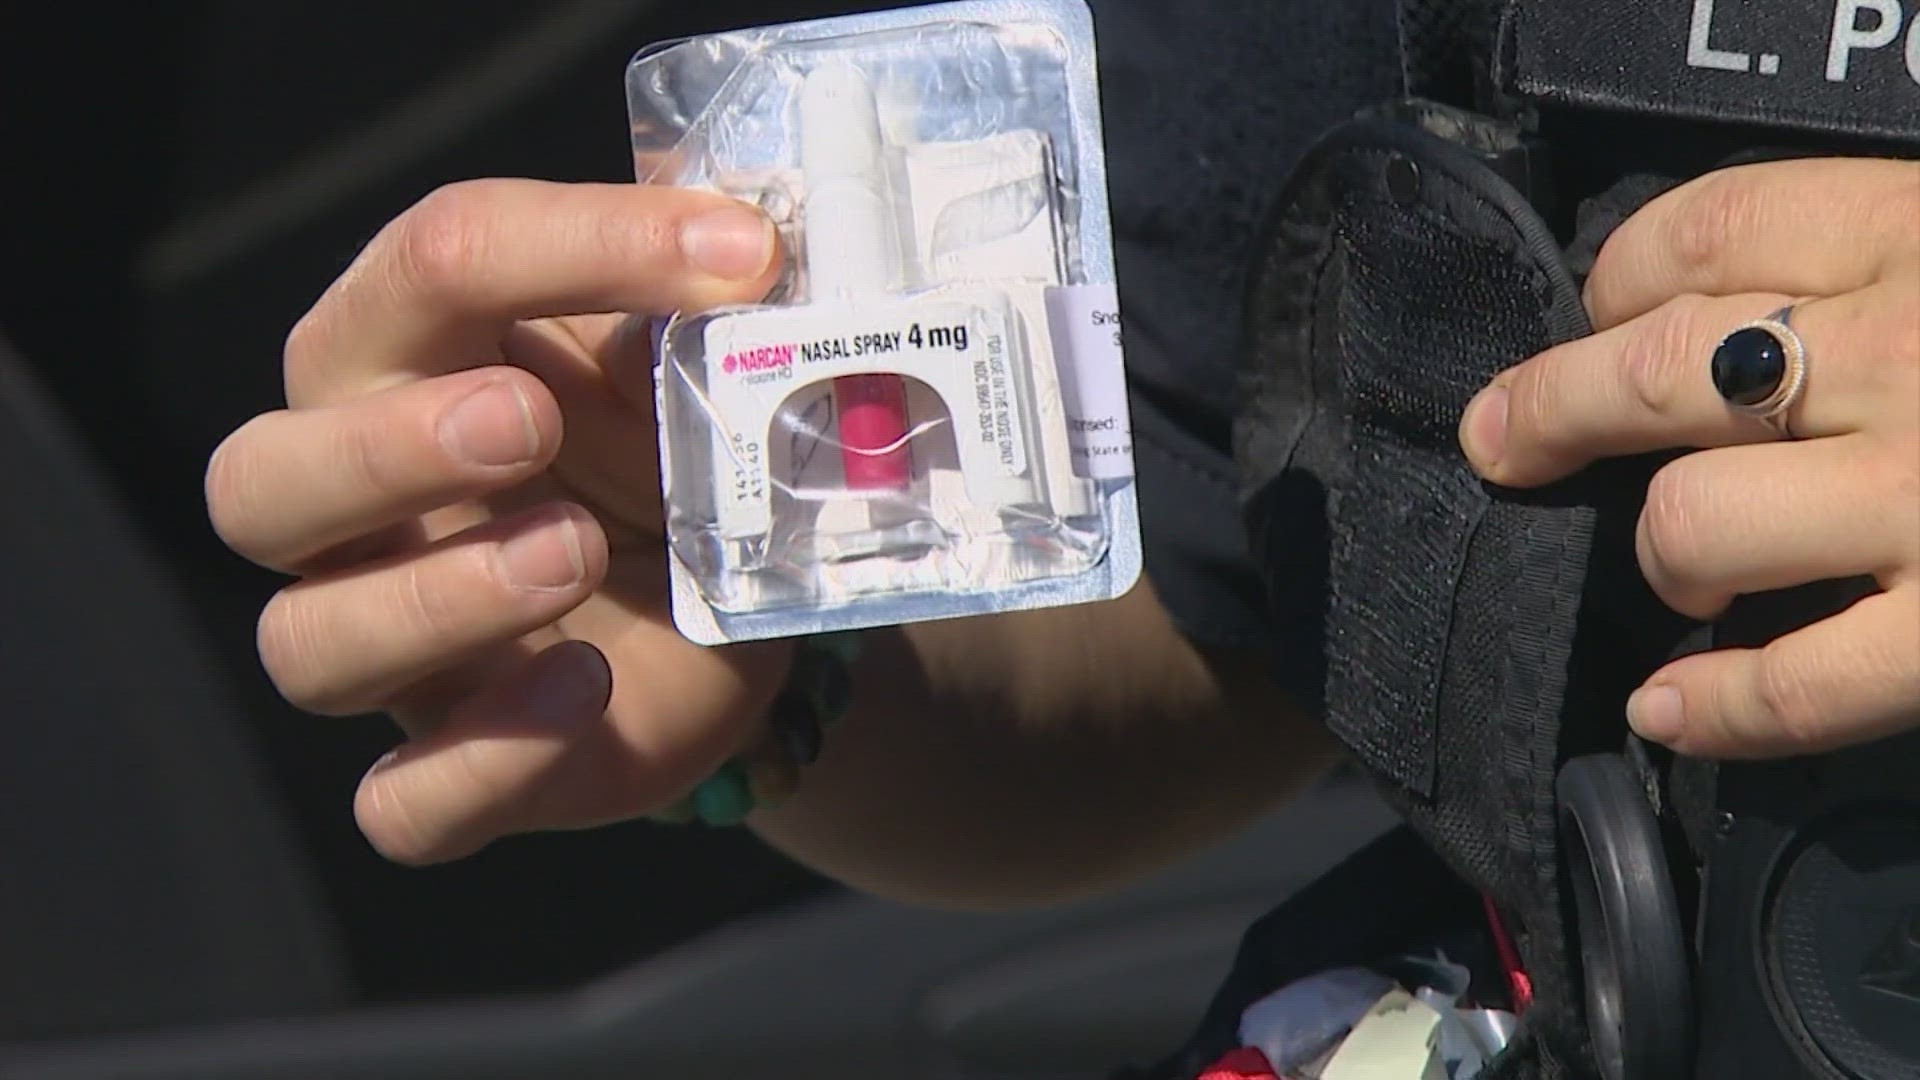 Police say people who have overdosed are requiring more doses of Narcan to revive them.